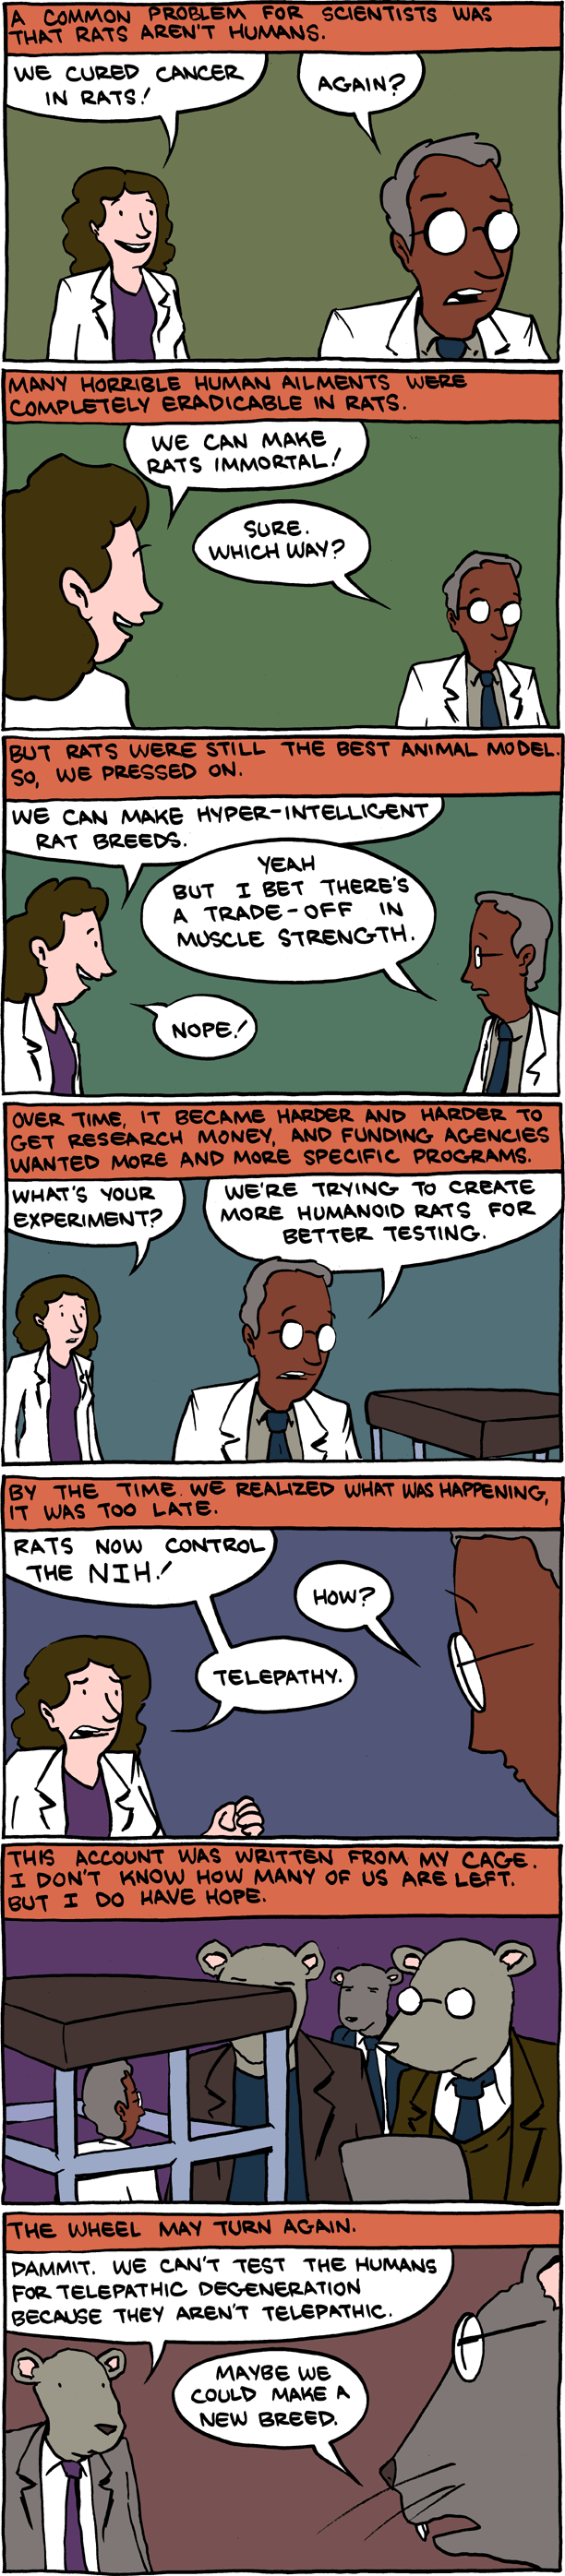 Comic about animal models by saturday morning breakfast cereal